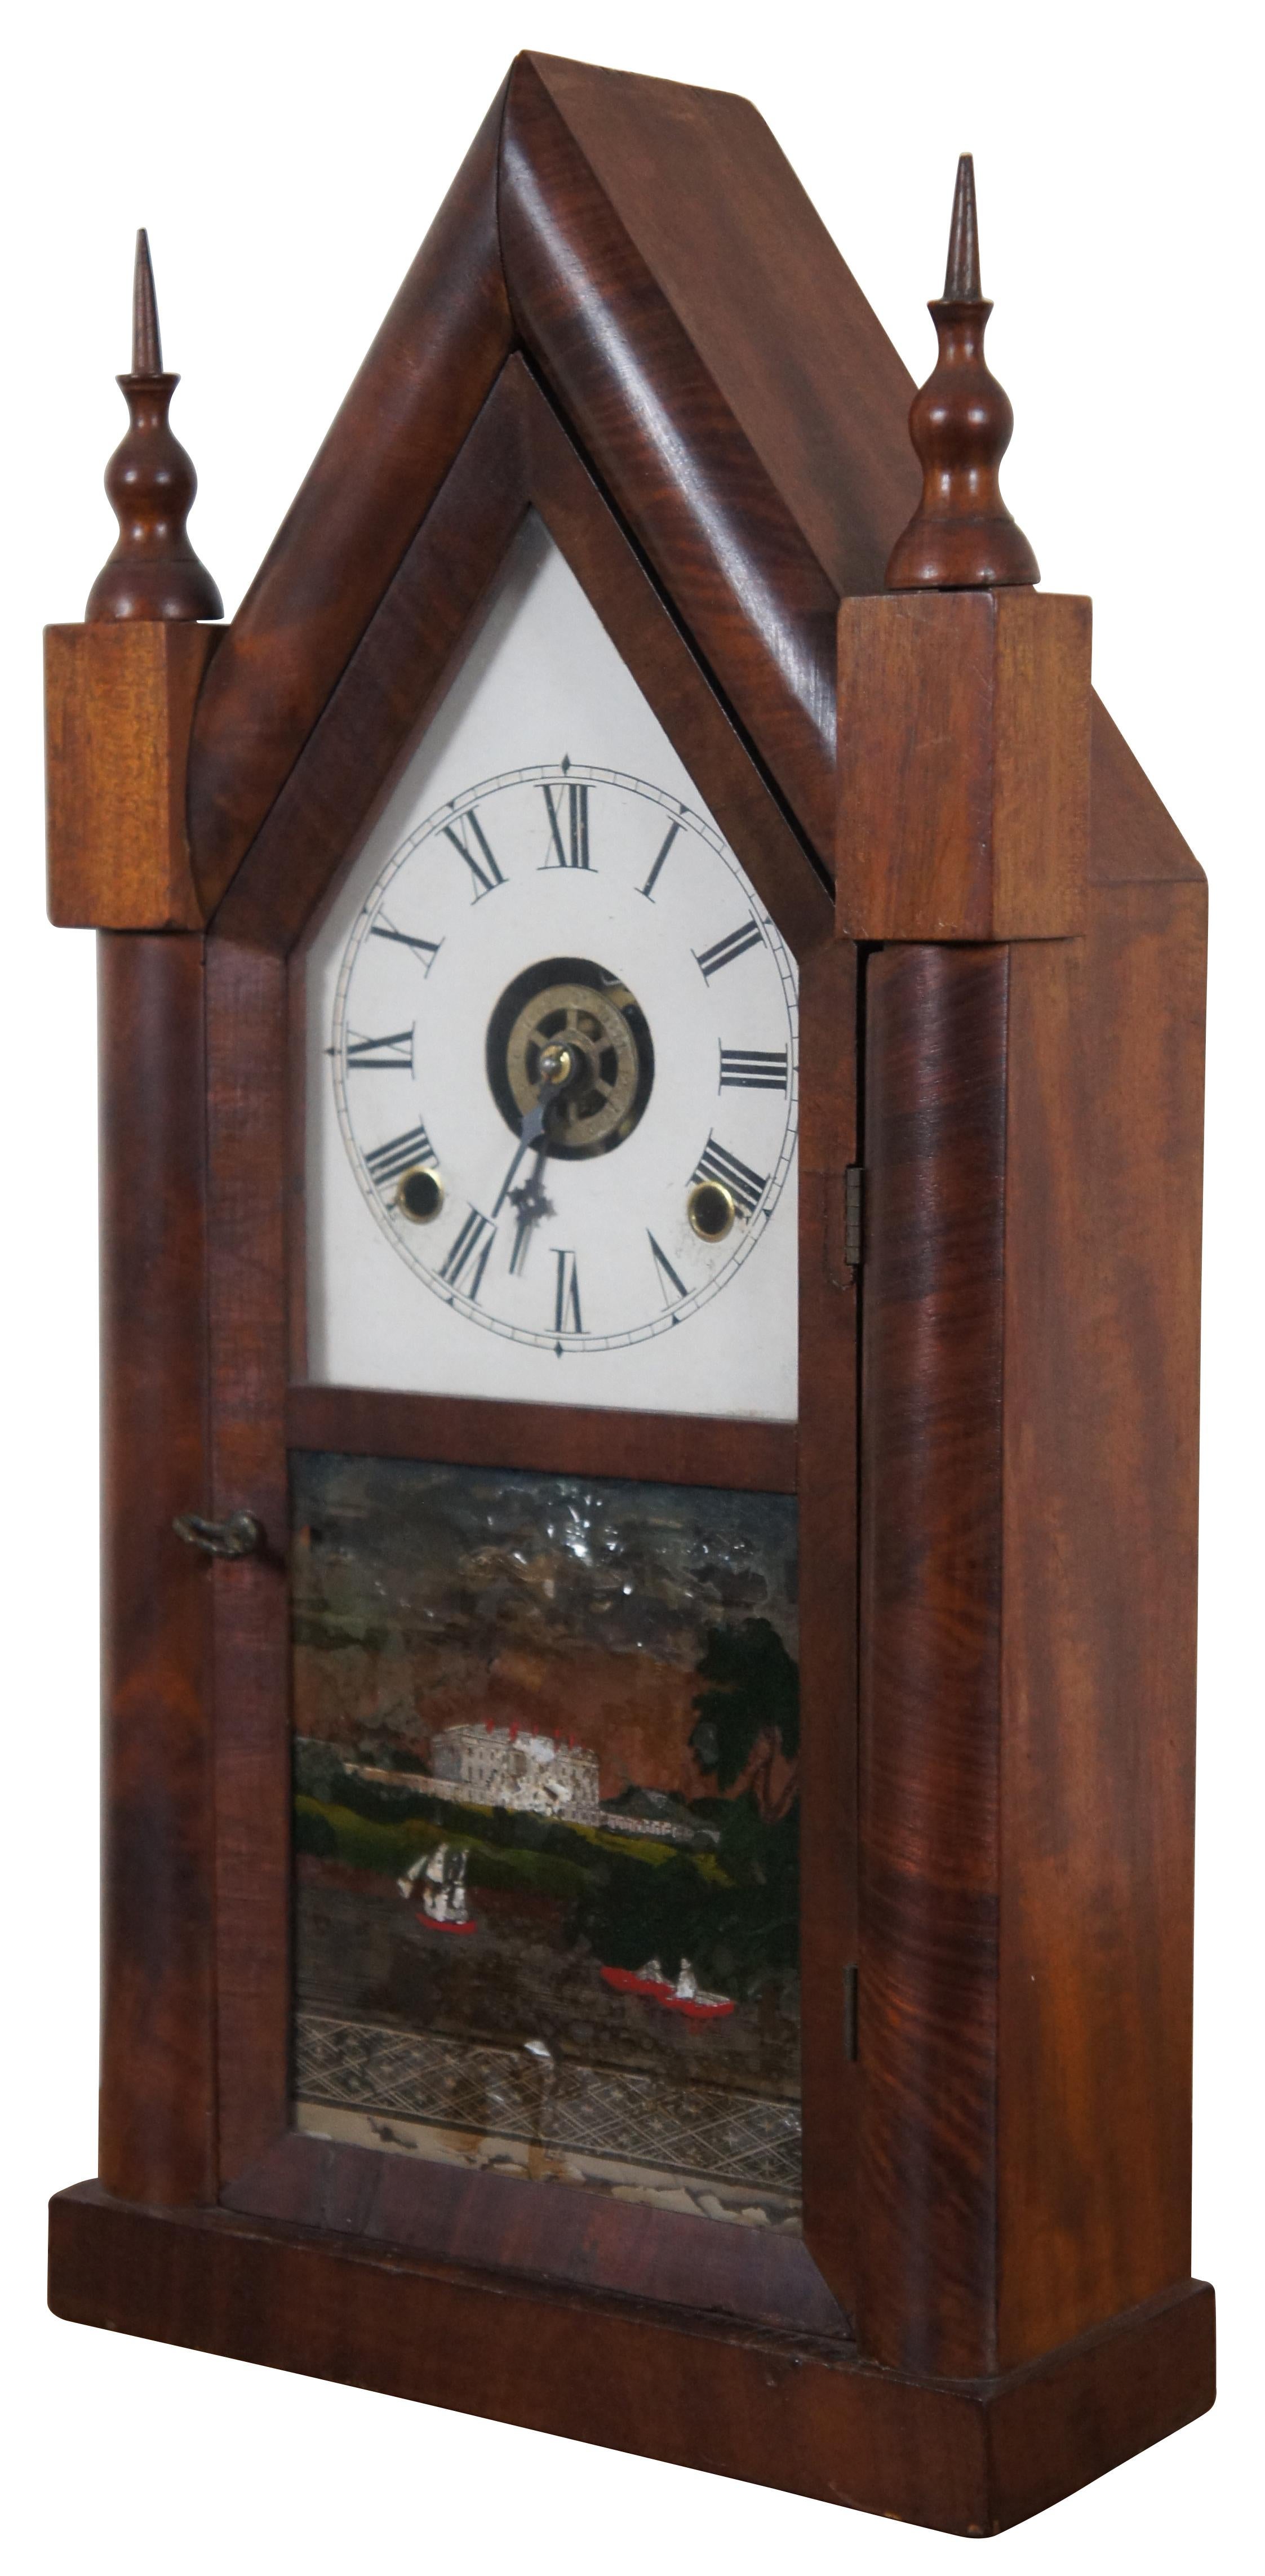 Antique 19th century mahogany cathedral / steeple Gothic Revival mantel clock by William L Gilbert Clock Company, with Roman numeral face and reverse painted scene on the door that features a large estate / castle / palace overlooking a body of